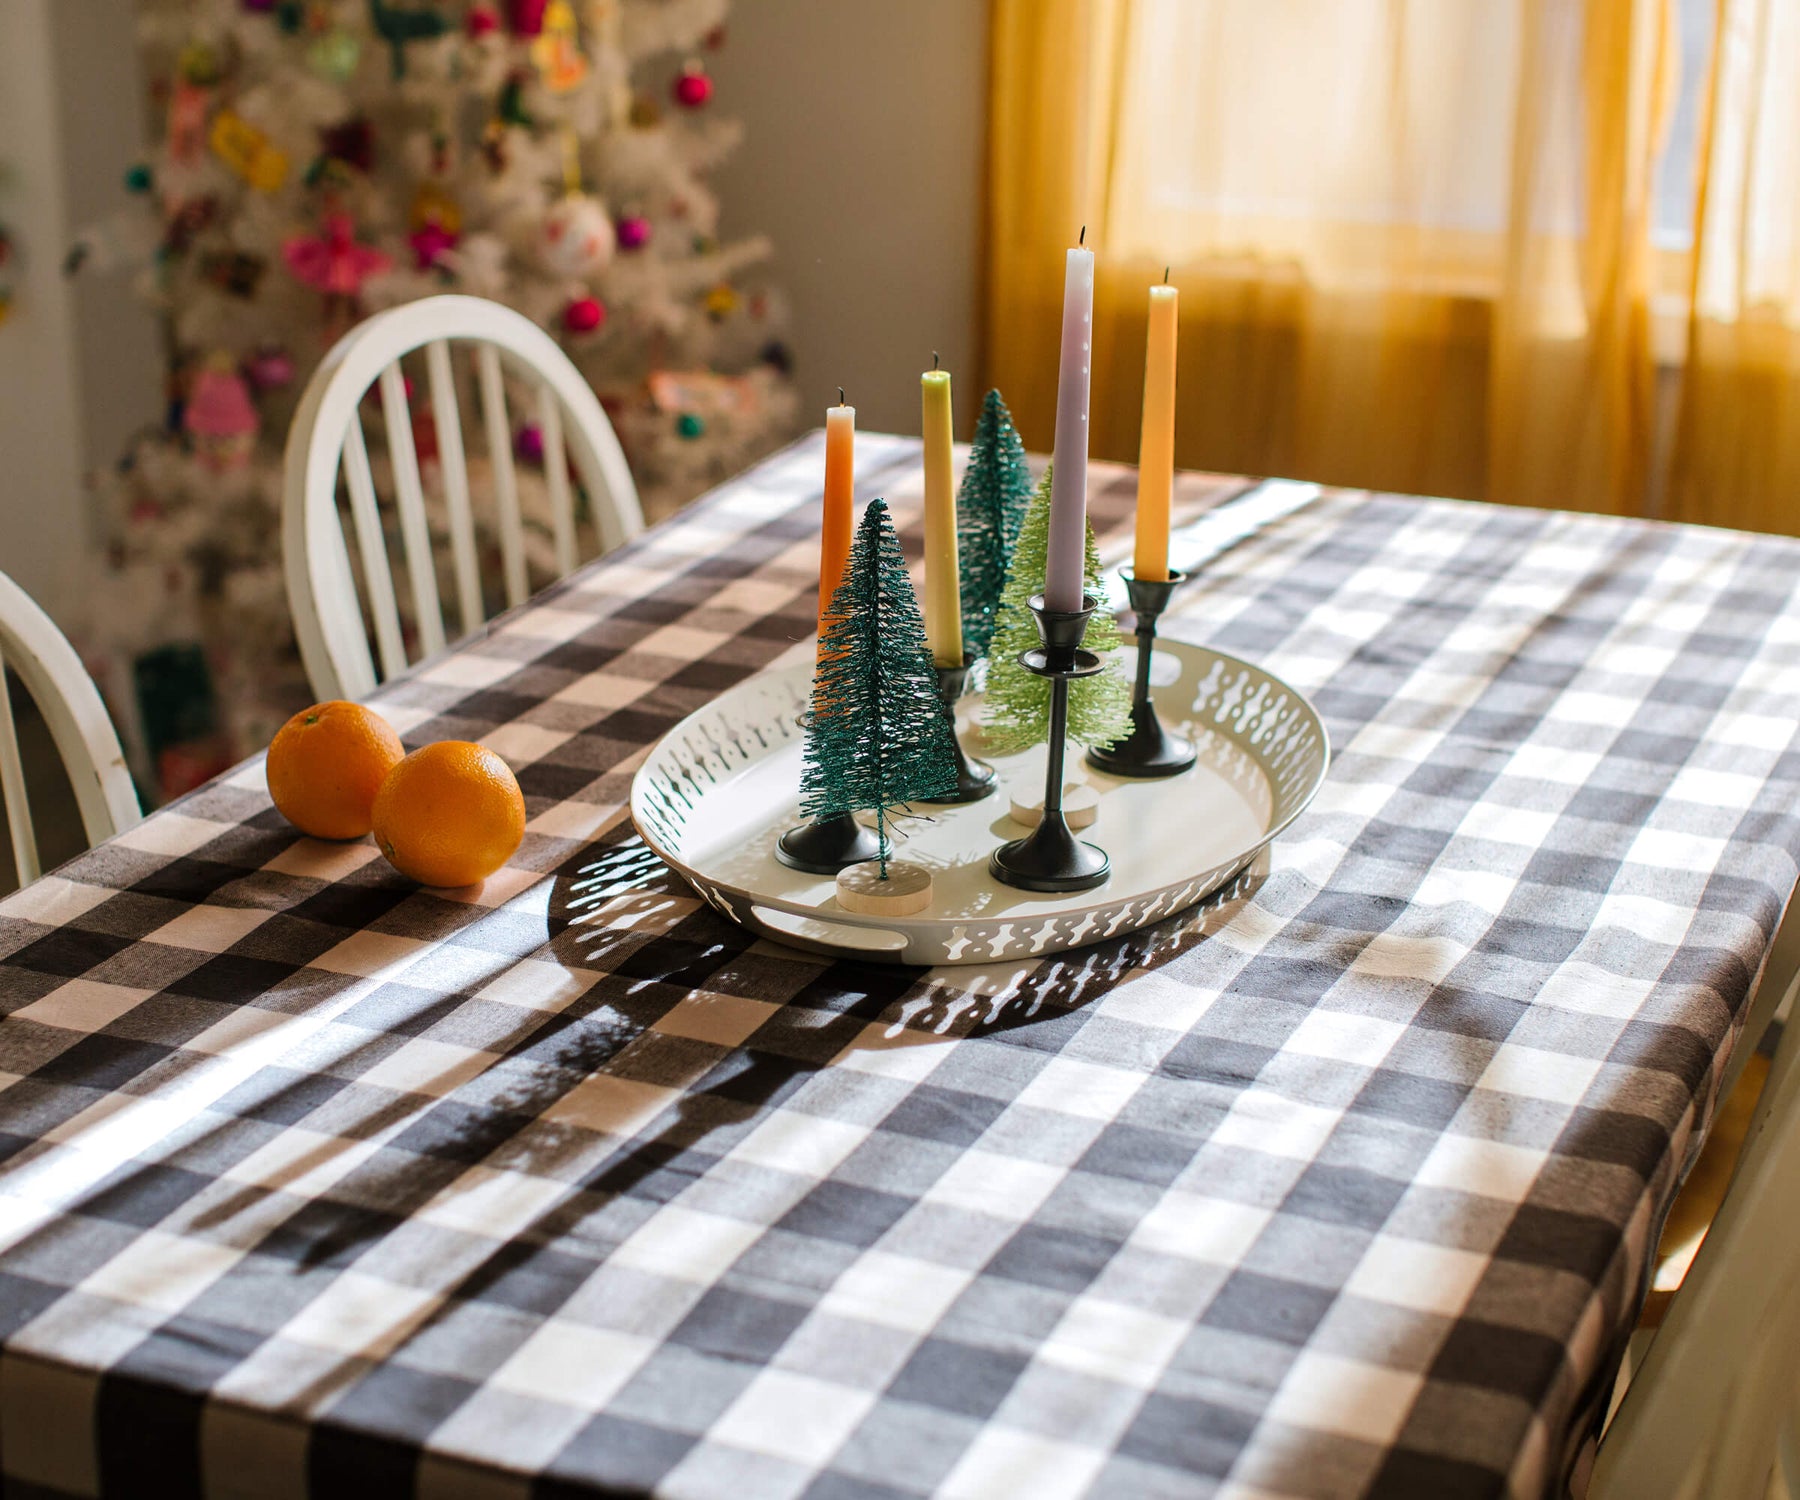 Buffalo plaid tablecloths suit holiday gatherings, like Christmas or Thanksgiving, evoking warmth and comfort.